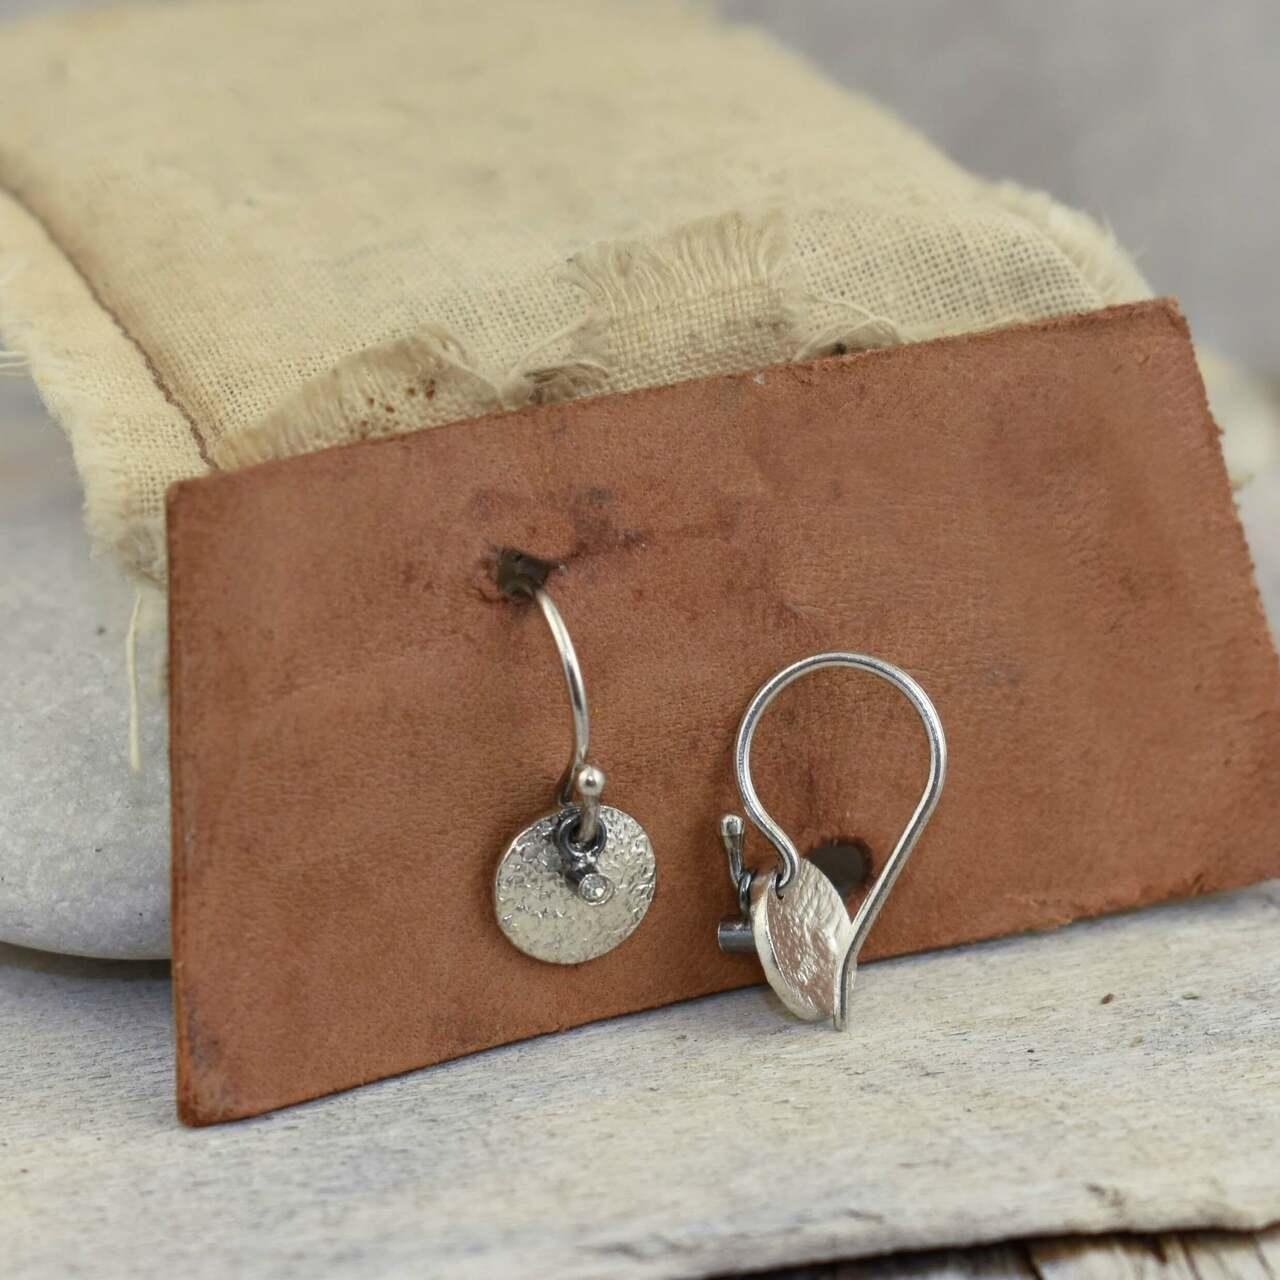 Minimalist earrings in handcrafted sterling silver with cz bling